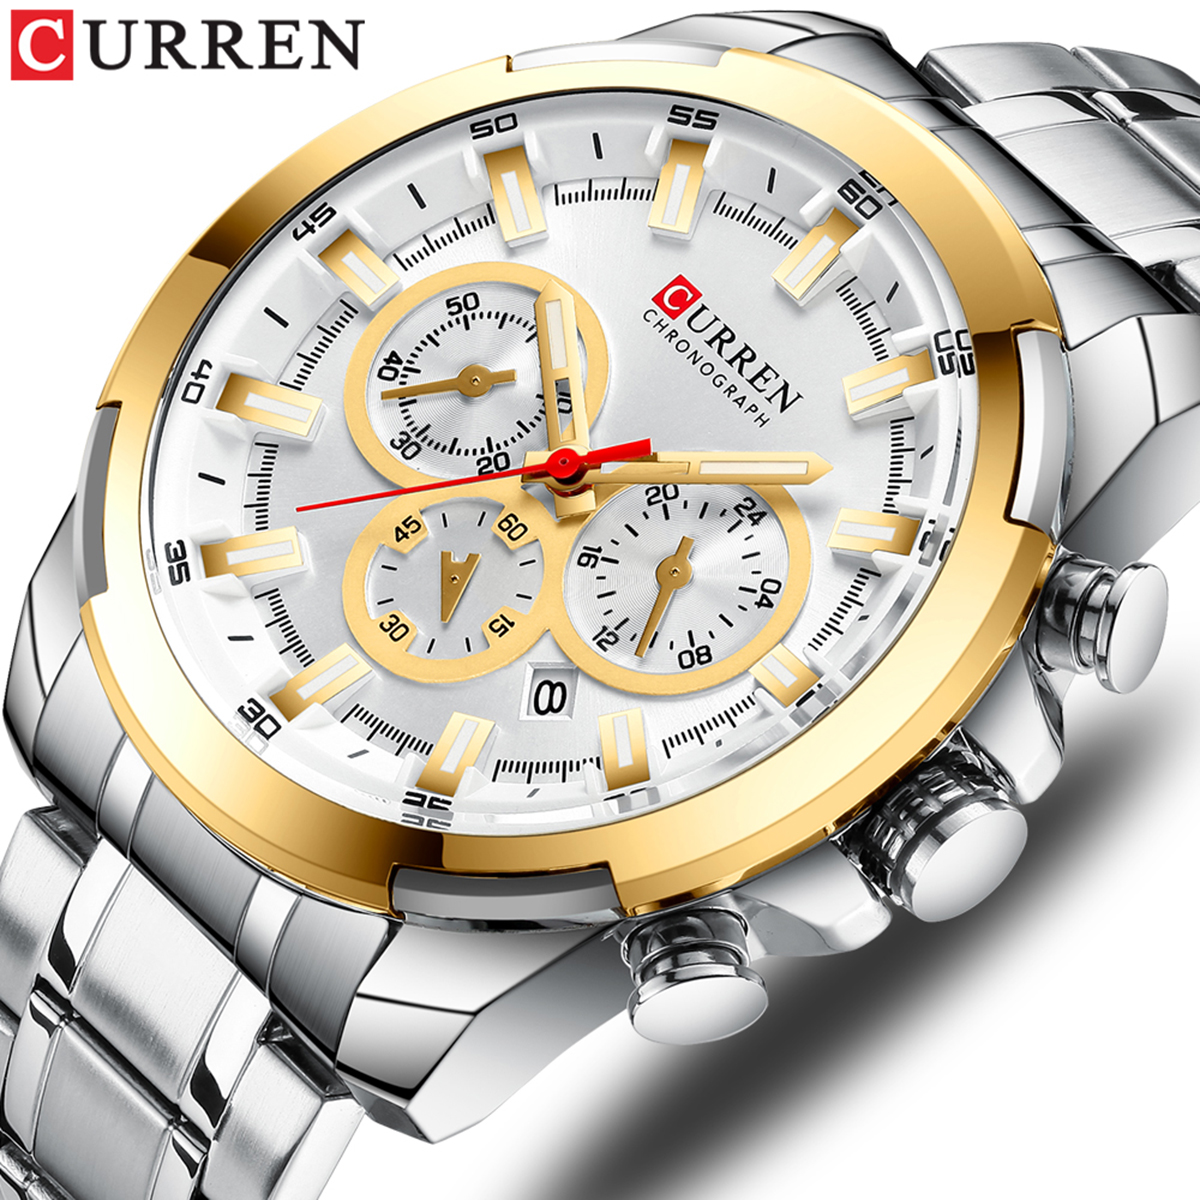 CURREN 8361 Quartz Man Wristwatch Watch for Male Men Watches with Calendar Indicator Date Waterproof Luminous Hands Three Sub-Dials Second Minute Microsecond Chronograph Stainless Steel Strap Band Wea - image 4 of 7